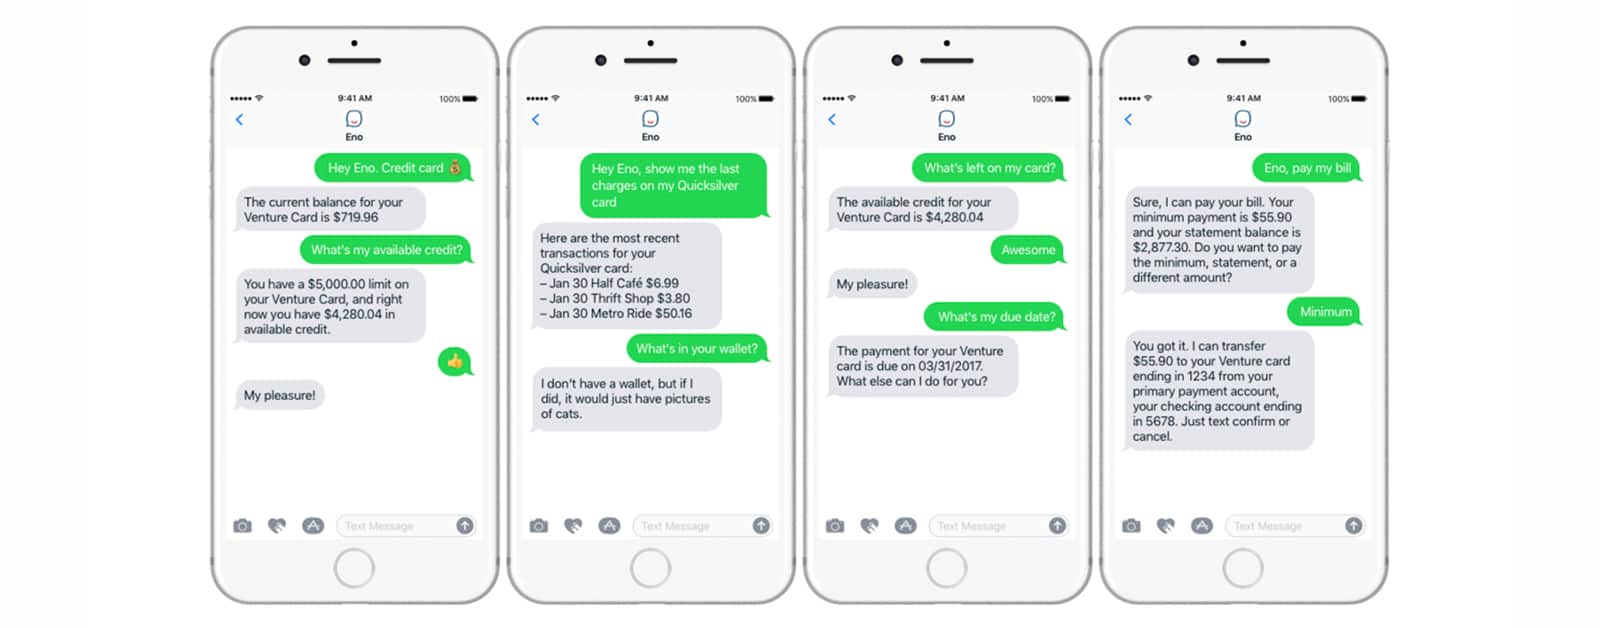 Capital One Launched A Natural Language Chatbot Named Eno